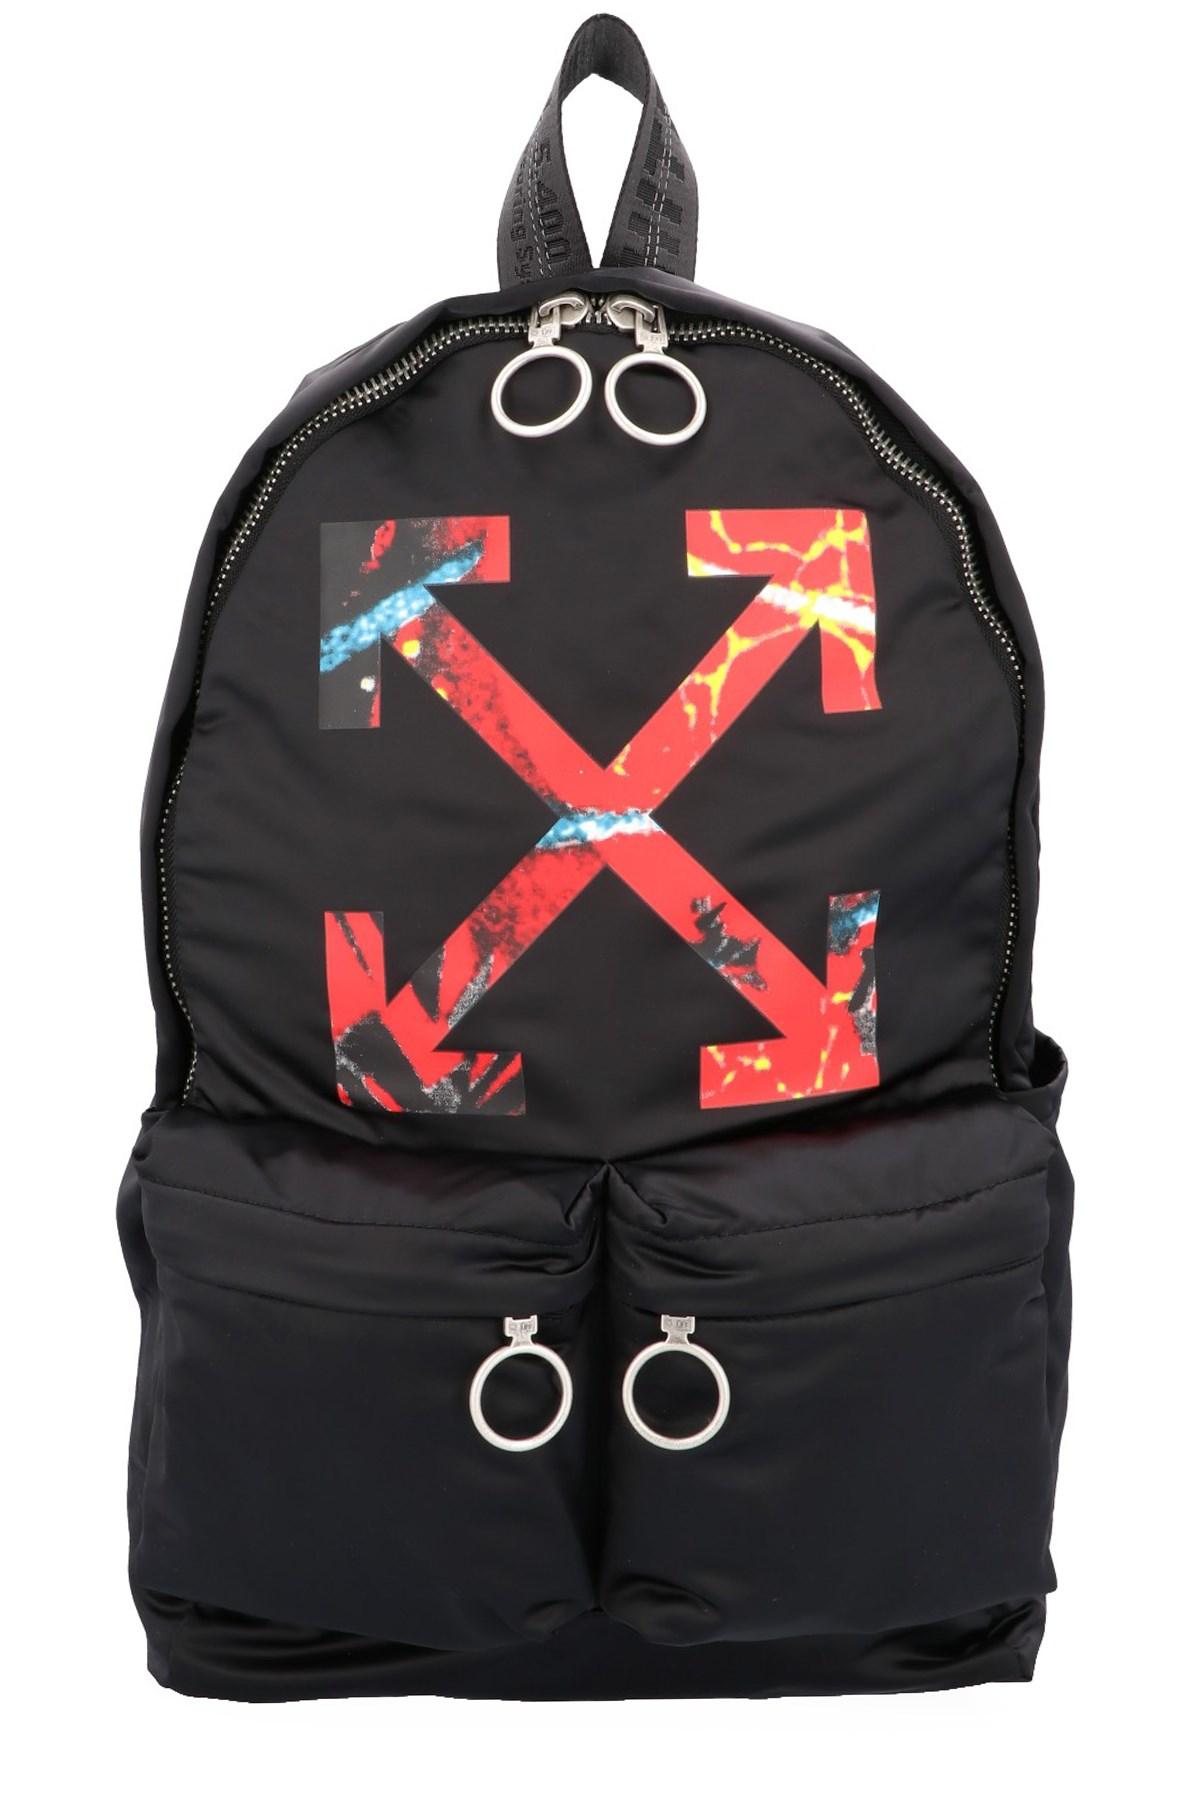 Off-White Canvas Backpack Rucksack Arrow Airport Tape Print Nylon